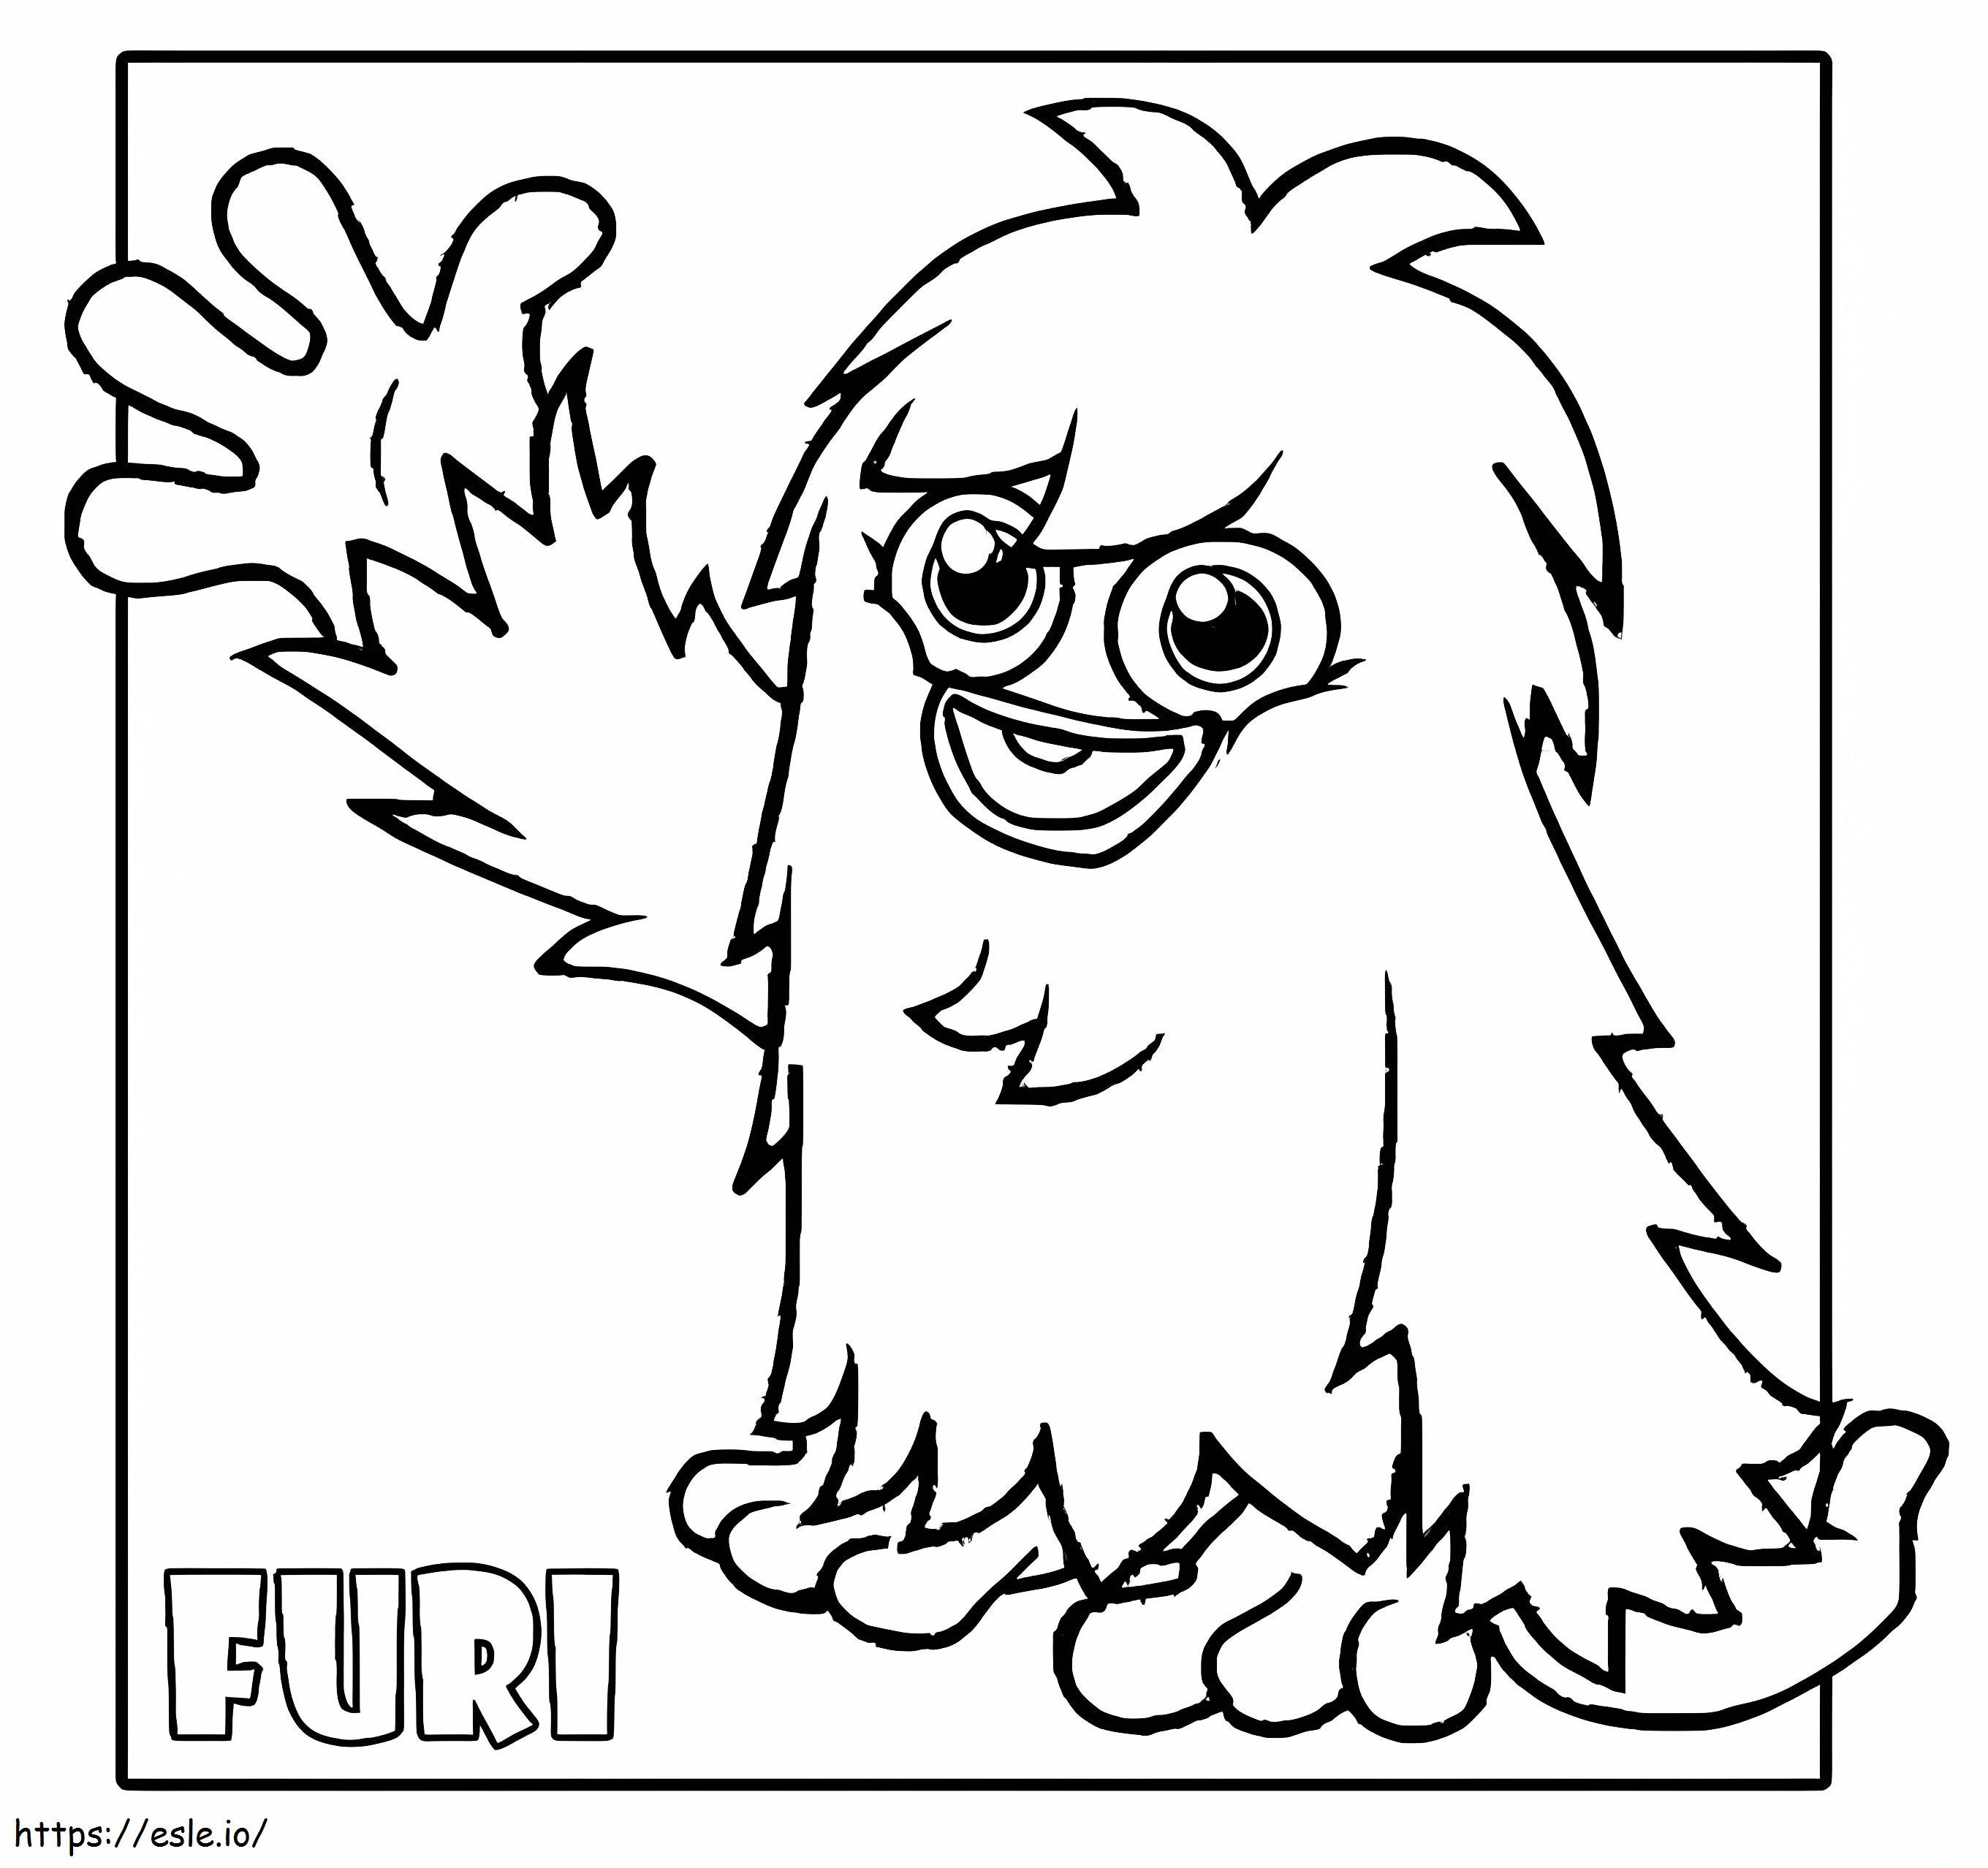 Fury From Moshi Monsters coloring page